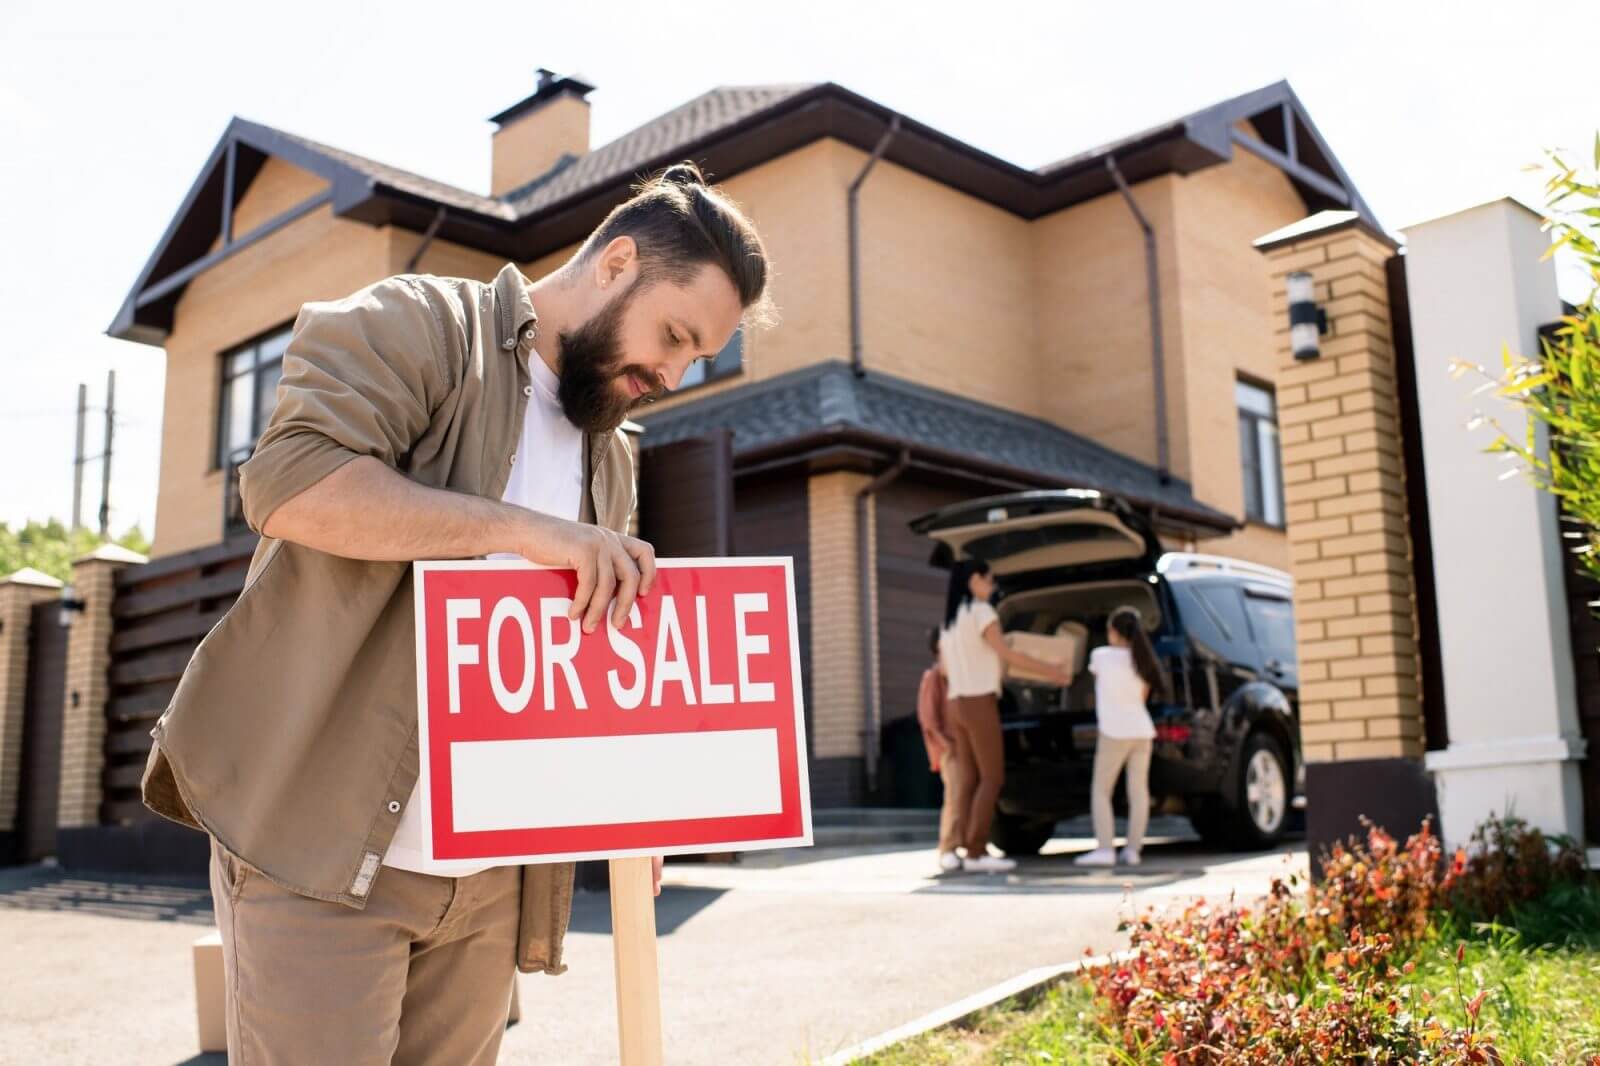 10 Things to do Before Listing Your Home For Sale